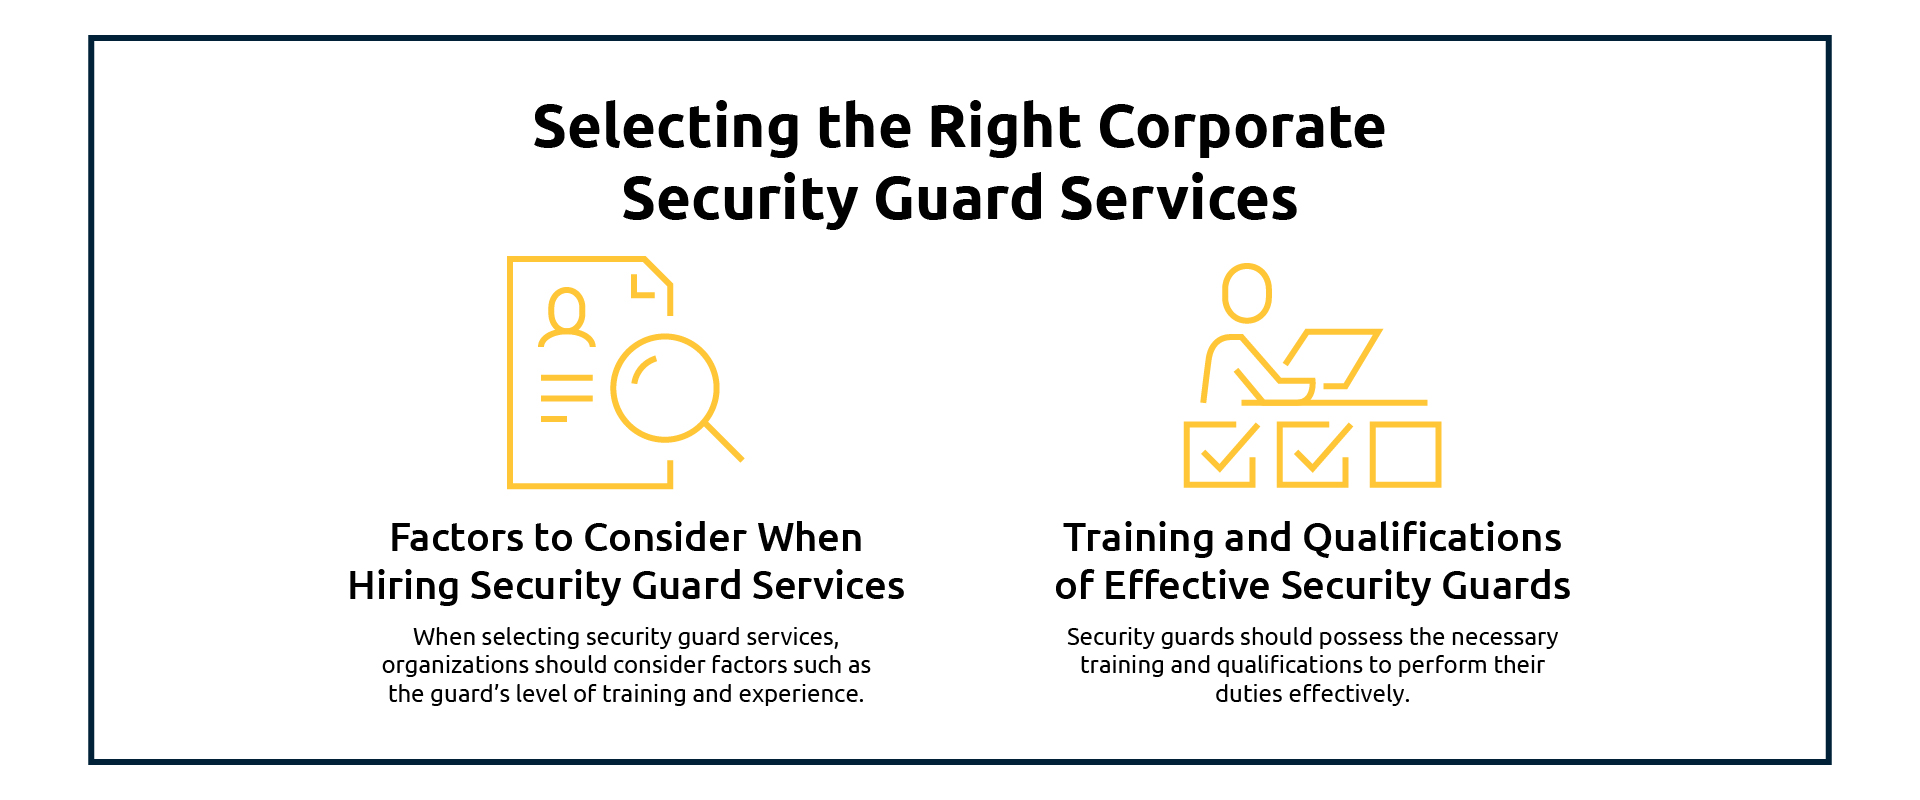 Selecting the Right Corporate Security Guard Services